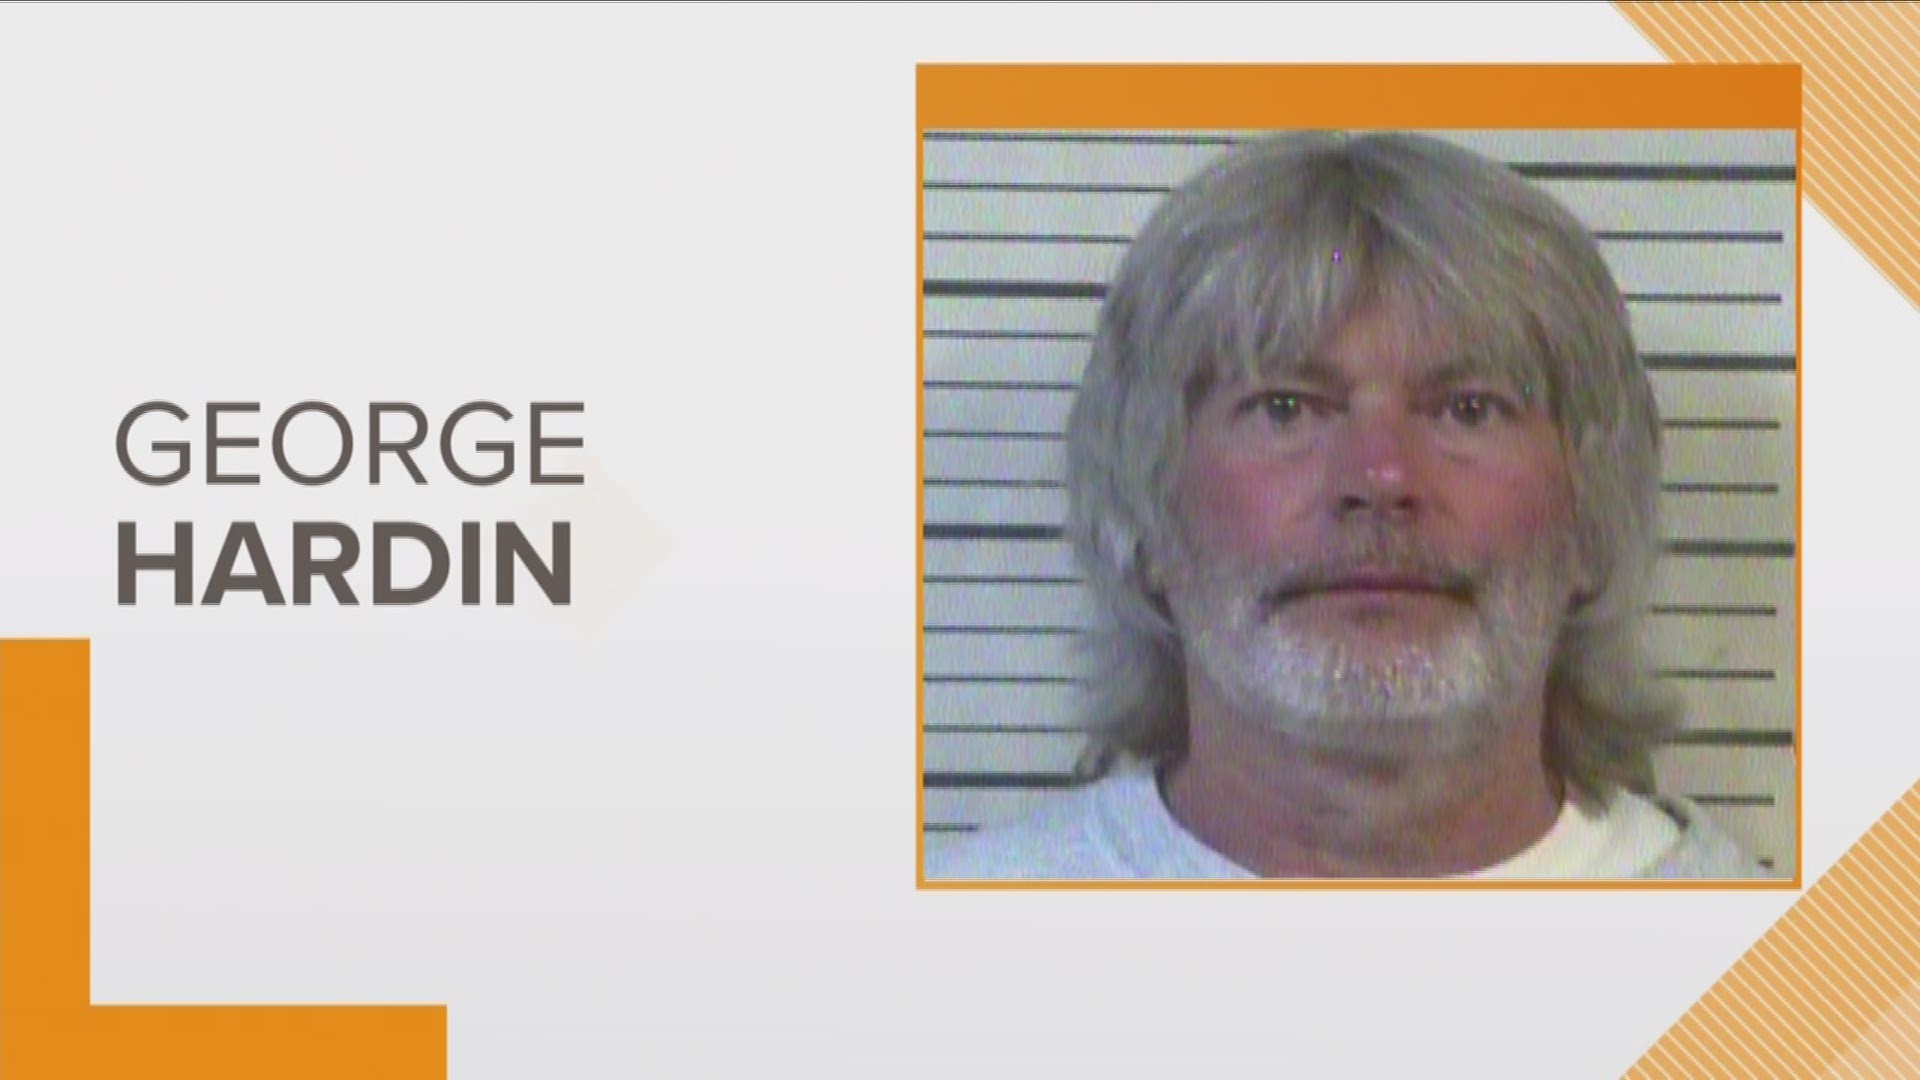 Authorities are looking for a convicted murderer from Crossville who is now wanted for kidnapping a woman at gunpoint over the weekend. Police have identified the suspect as 57-year-old George Edwin Hardin. Hardin is still on the run with warrants out for his arrest.